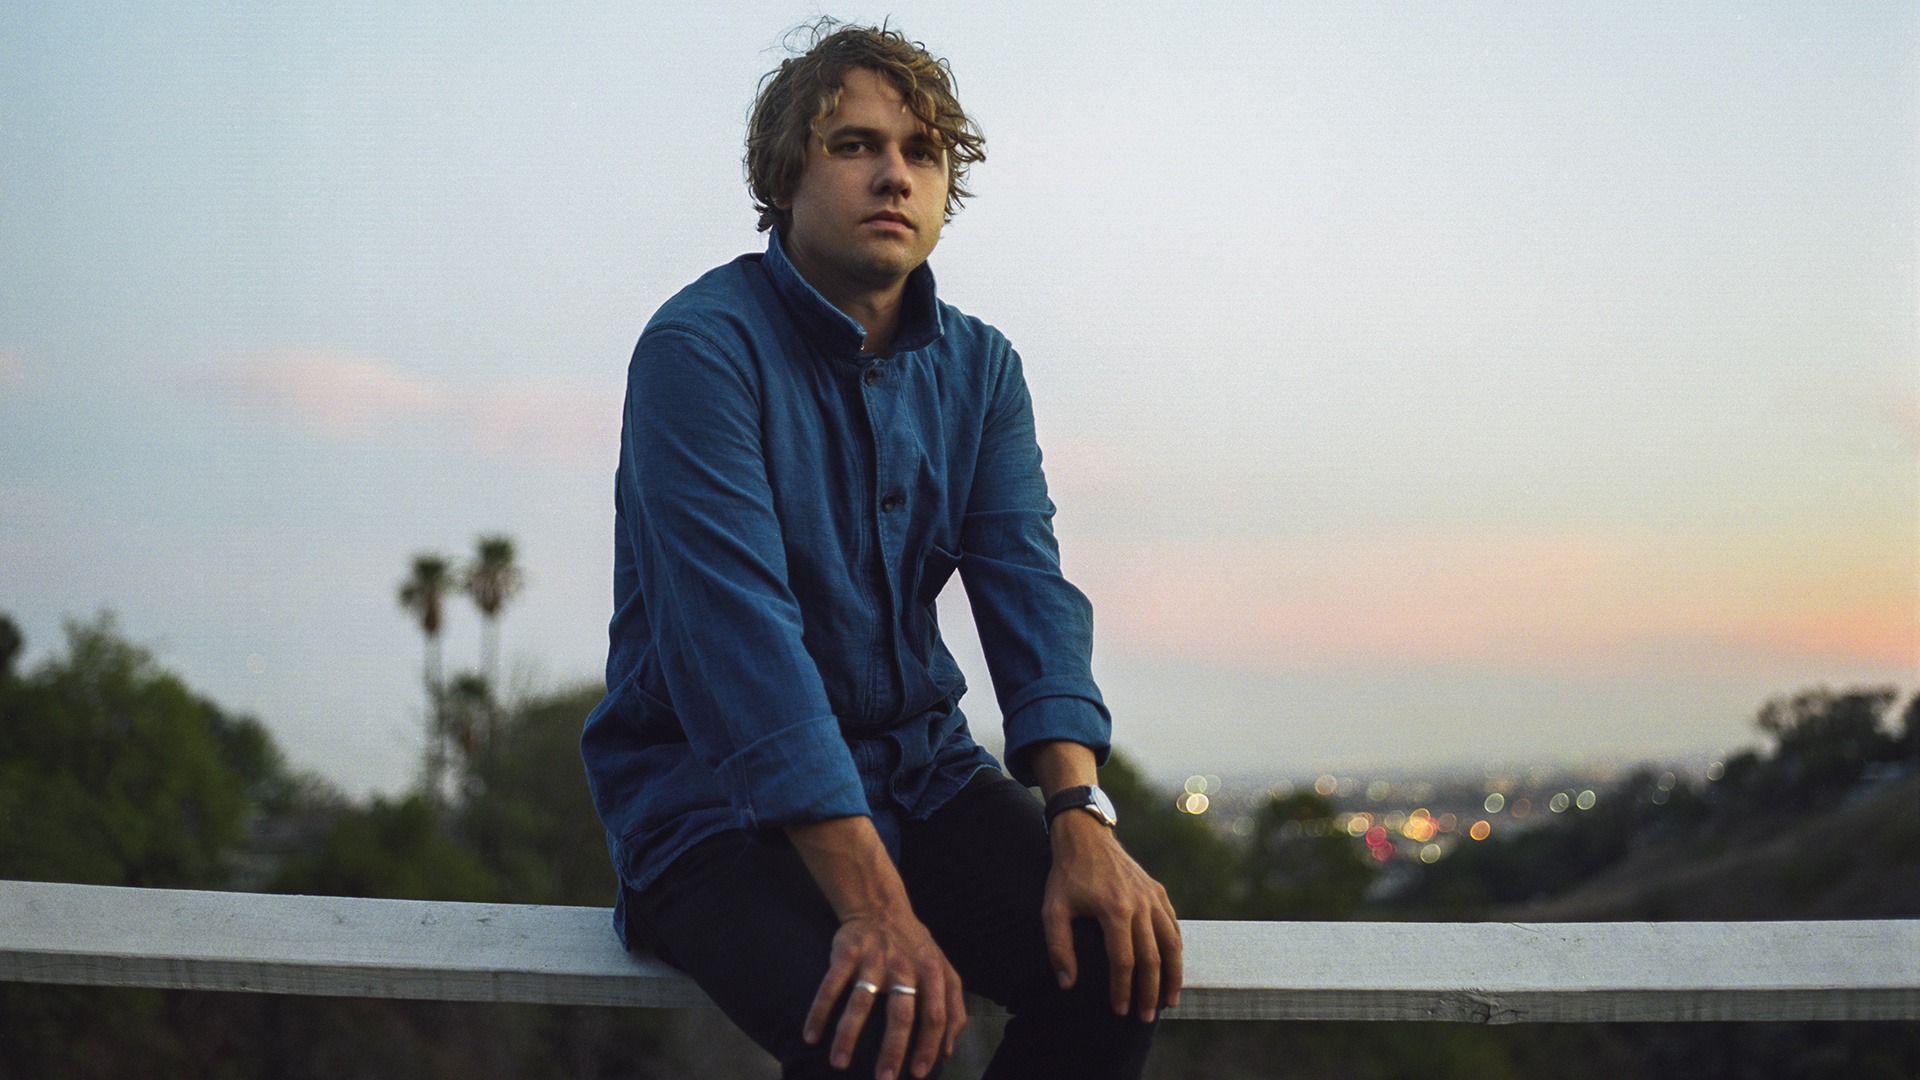 Kevin Morby, Album preview, Stream, Kevin Morby, 1920x1080 Full HD Desktop